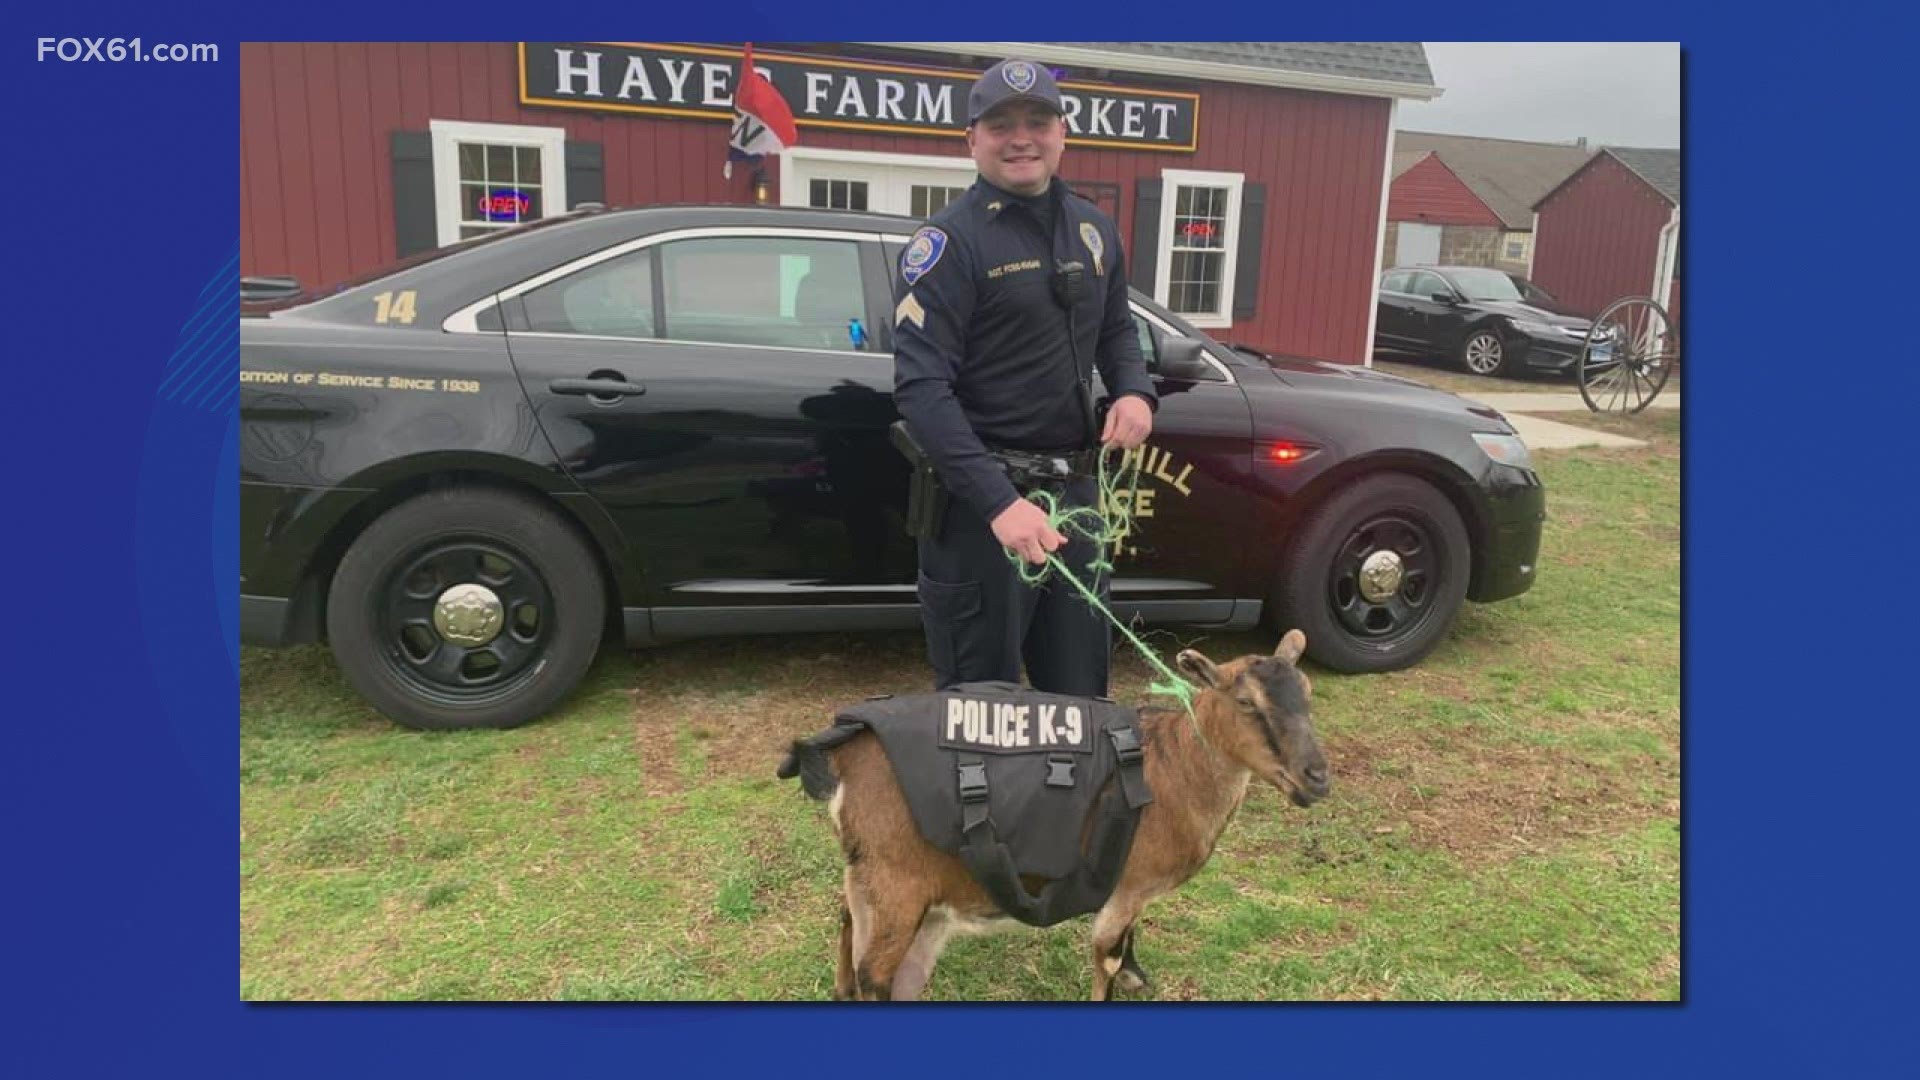 Bonnie came to the department from Hayes Farm 1868. The farm has been breeding goats, specifically Oberhasli, to expand goat patrols with police in the region.